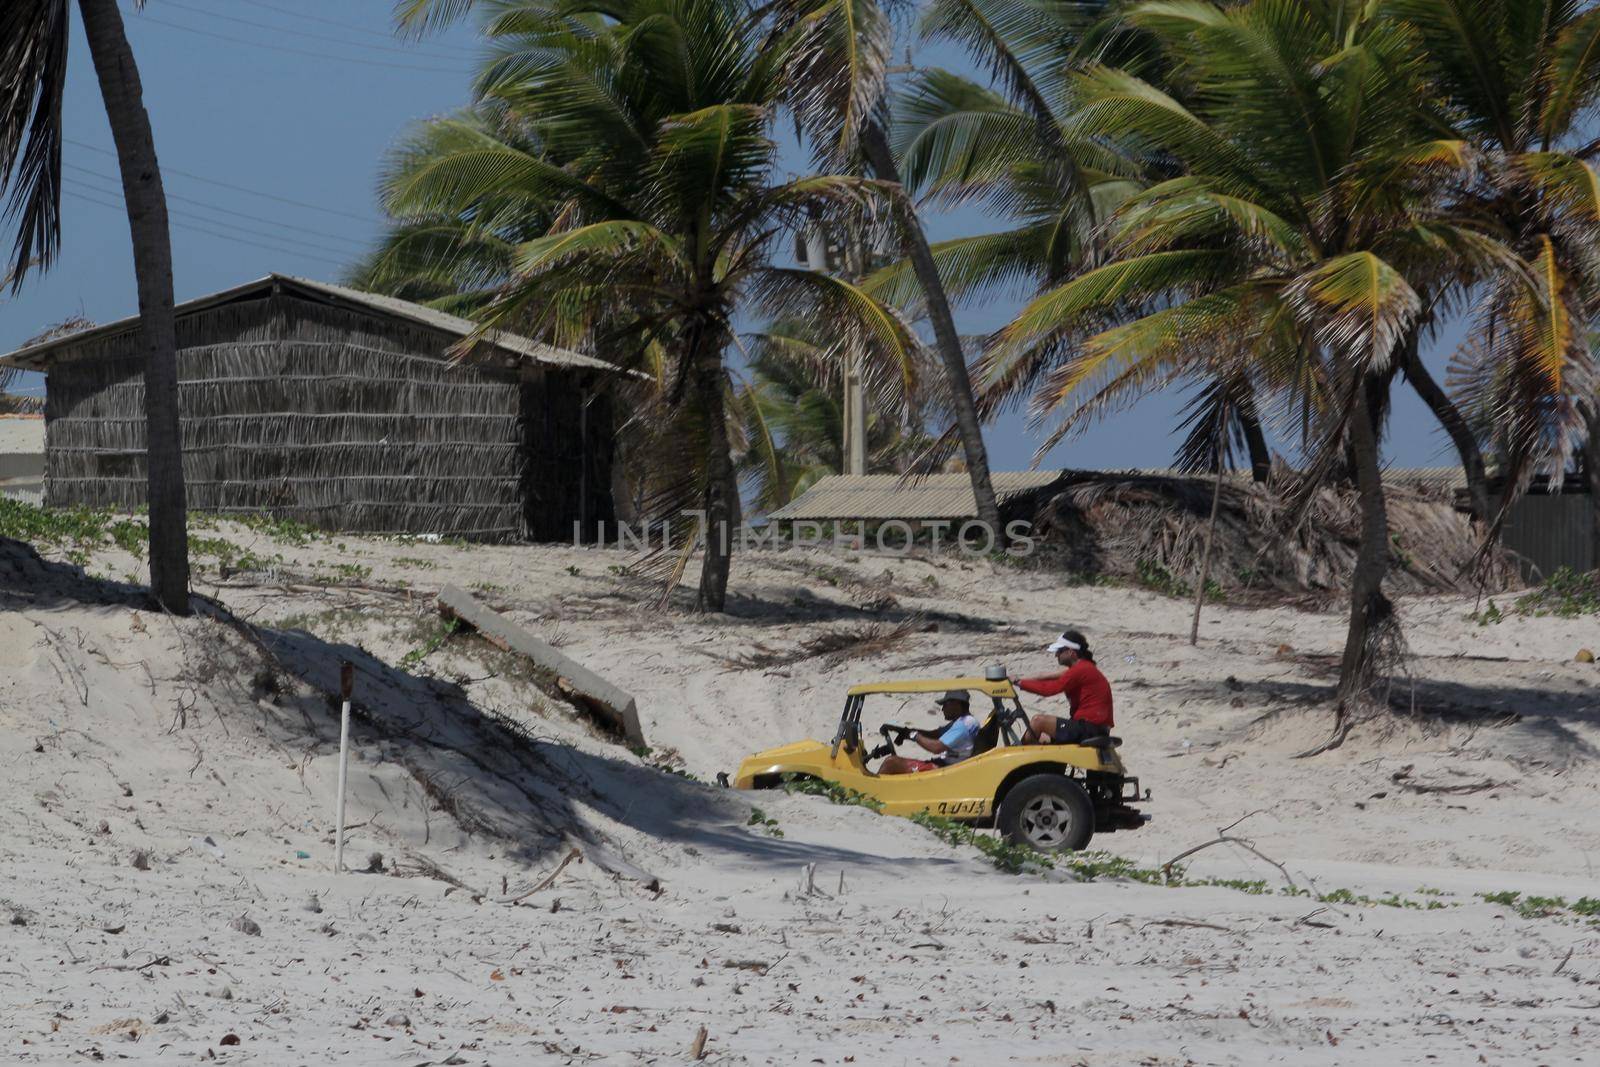 jandaira, bahia / brazil - december 24, 2013: buggy vehicle is seen passing by tourists through the sand dunes of Mangue-Seco, in the municipality of Jandaira.